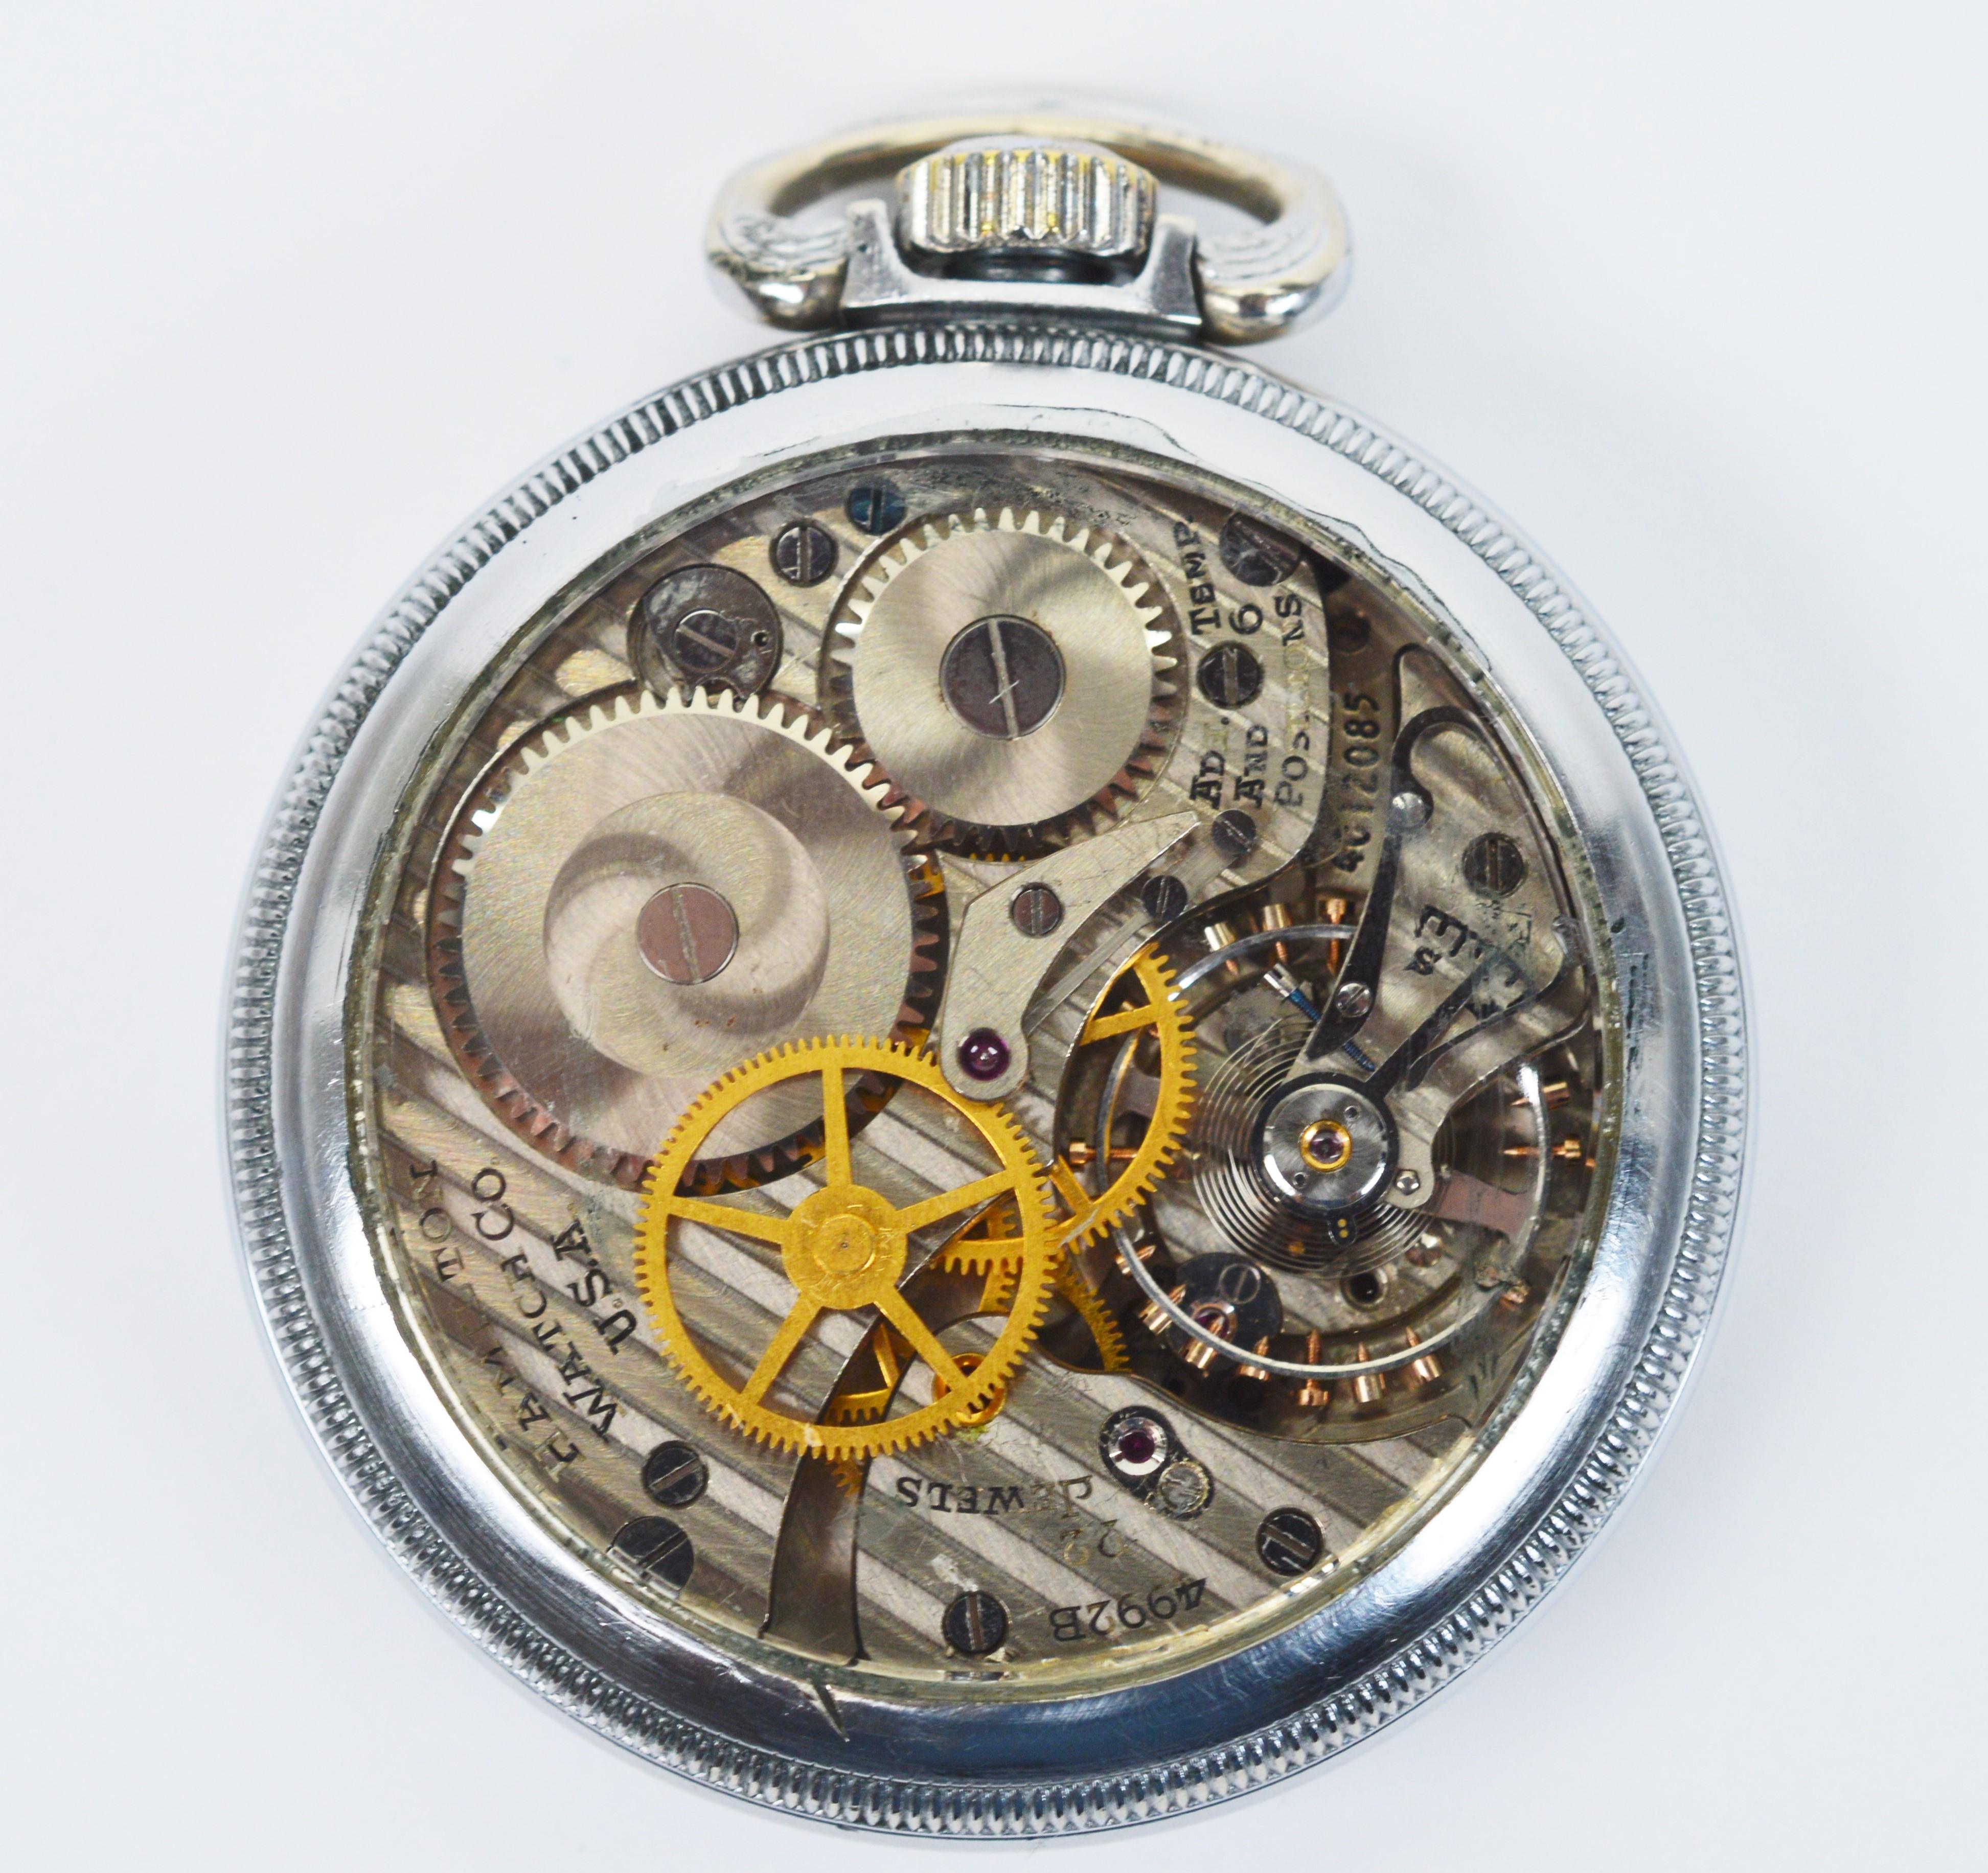 Desirable collectable, Hamilton Model 4992B, GCT US WWII Military Pocket Watch. This interesting timepiece has an added display back to view the 22 jewel movement with adjusted six position in motion. As military issue, circa 1942, this American